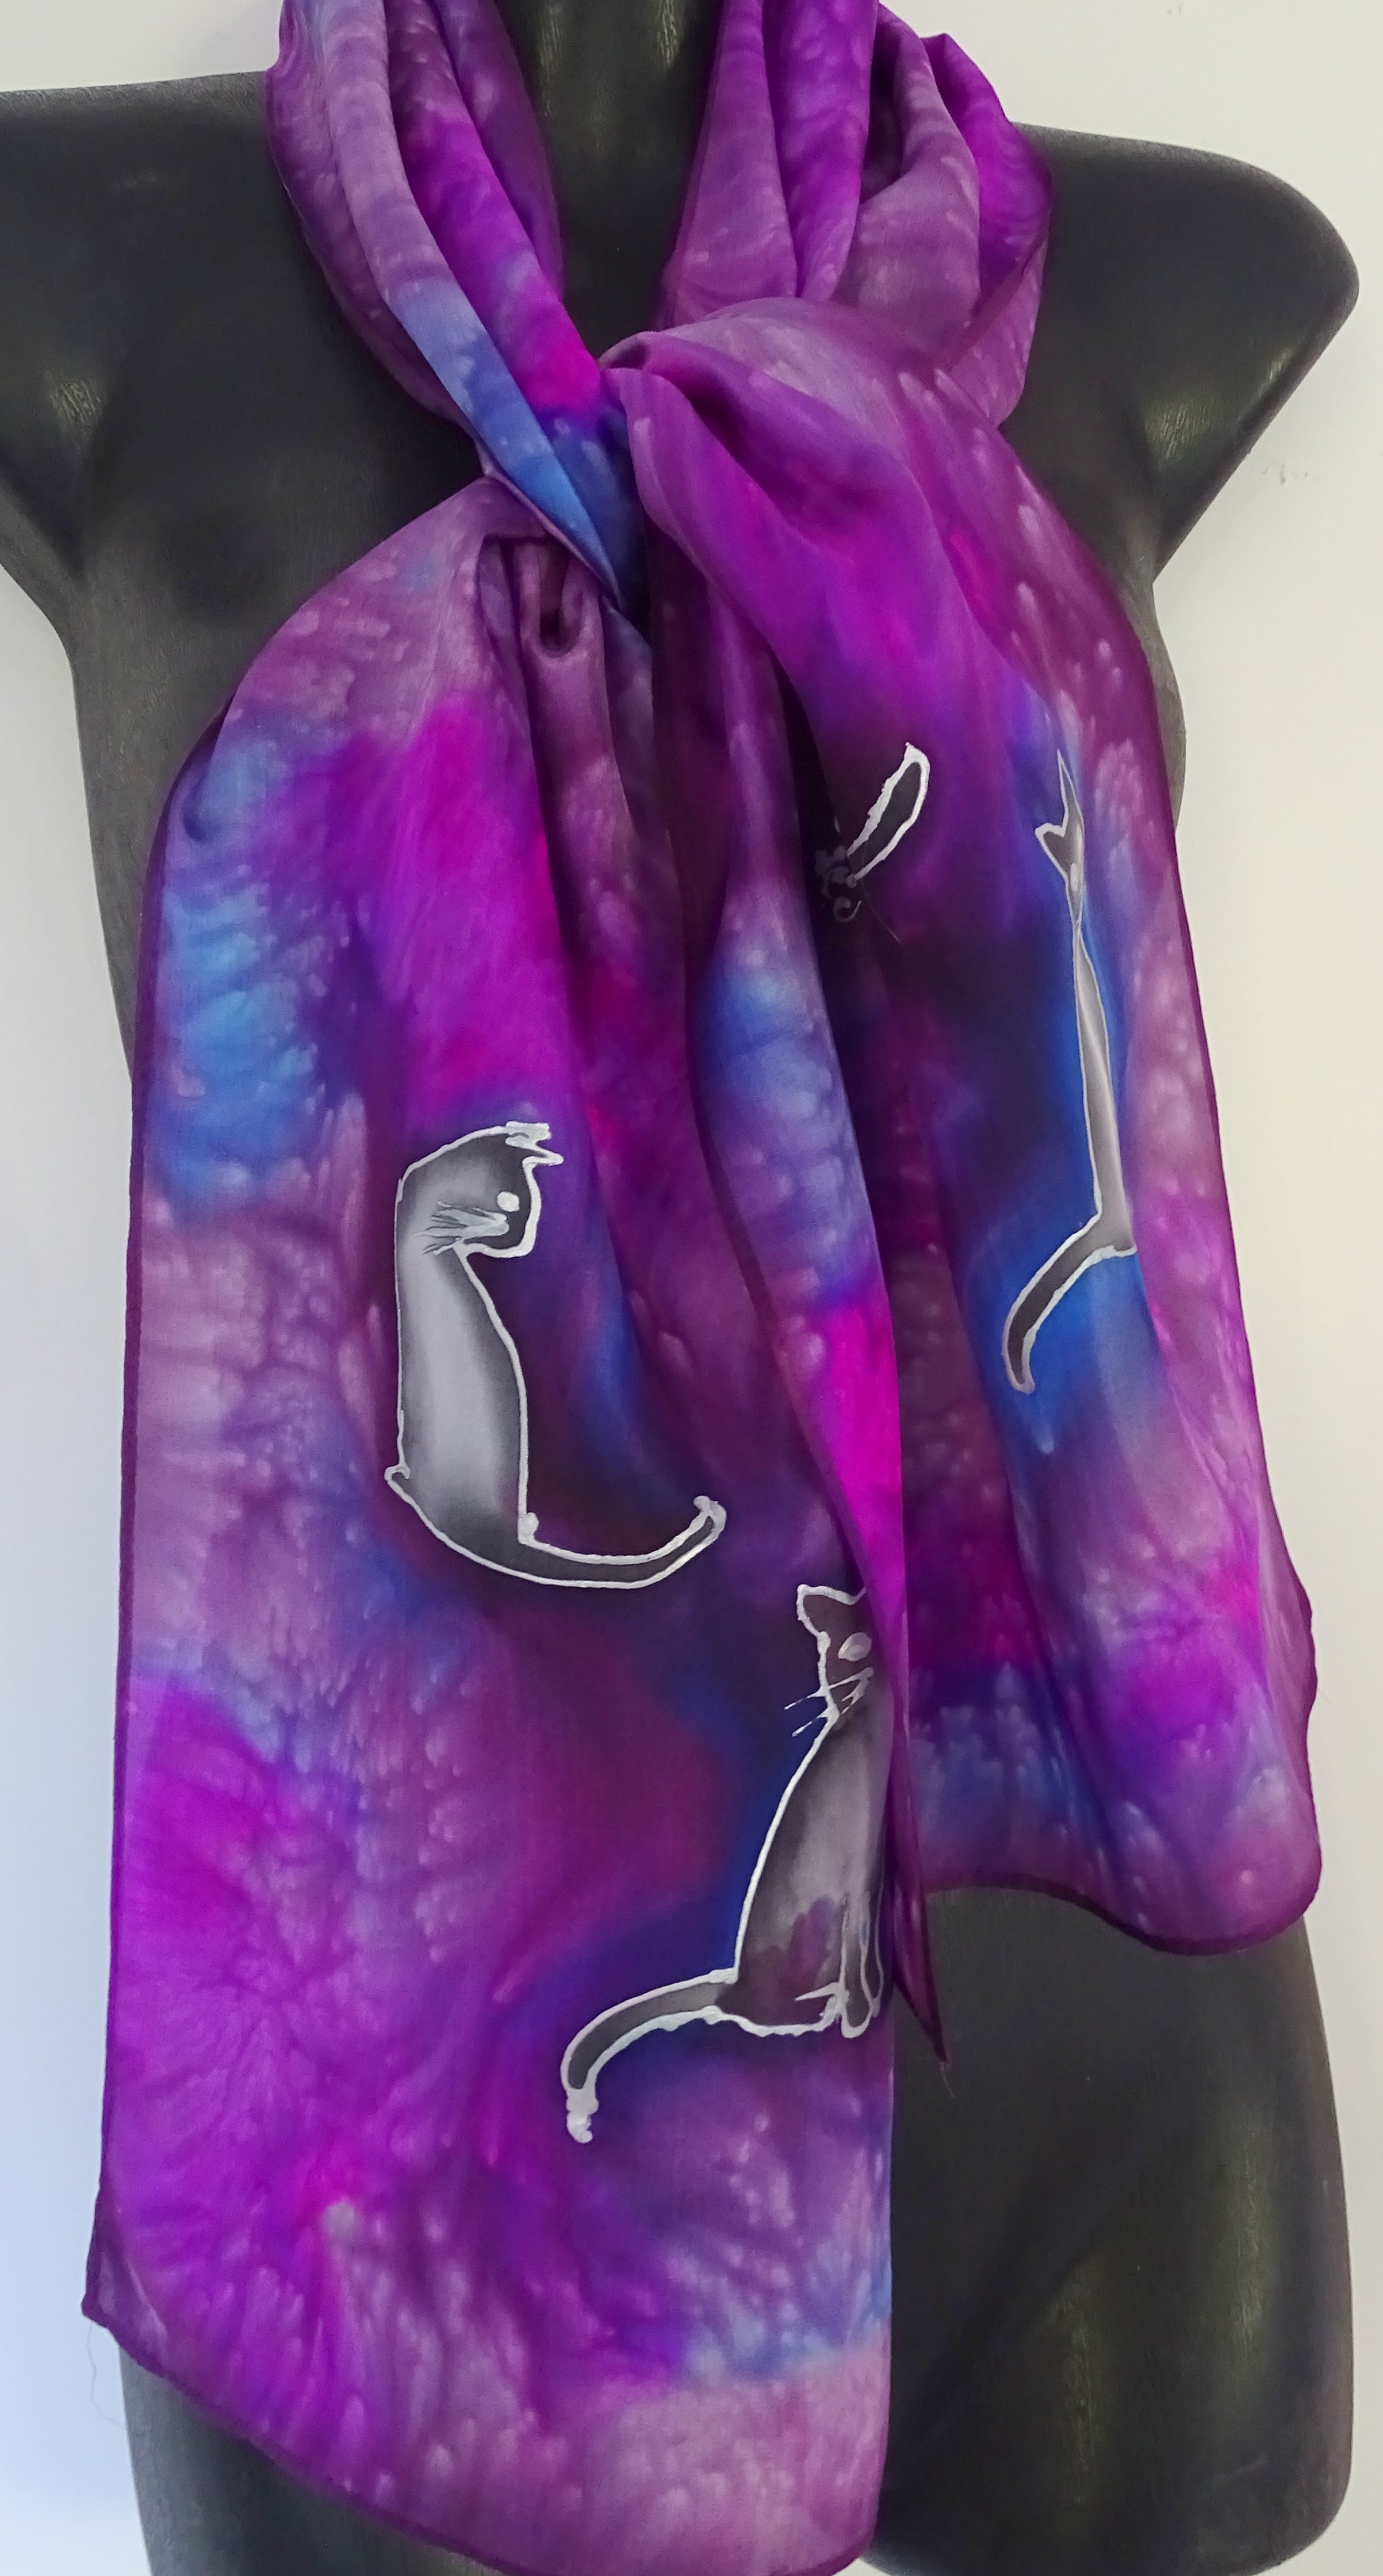 Cats on Purple and Cerise -  Animal Hand painted Silk Scarf